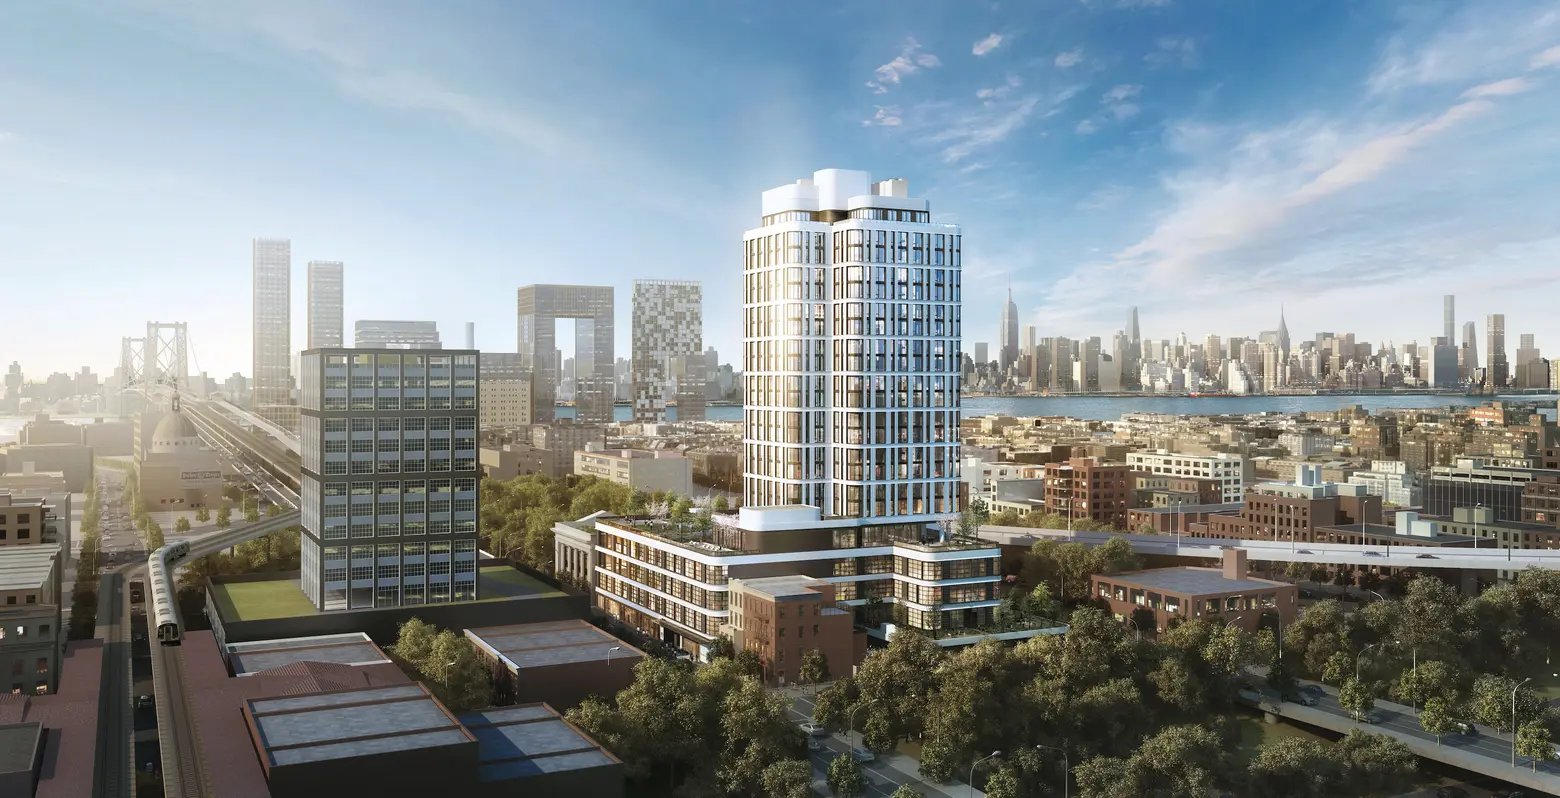 Dime Savings Bank, The Dime, Williamsburg, Housing lotteries, affordable housing, charney construction and development, fogarty finger architects, tavros development partners